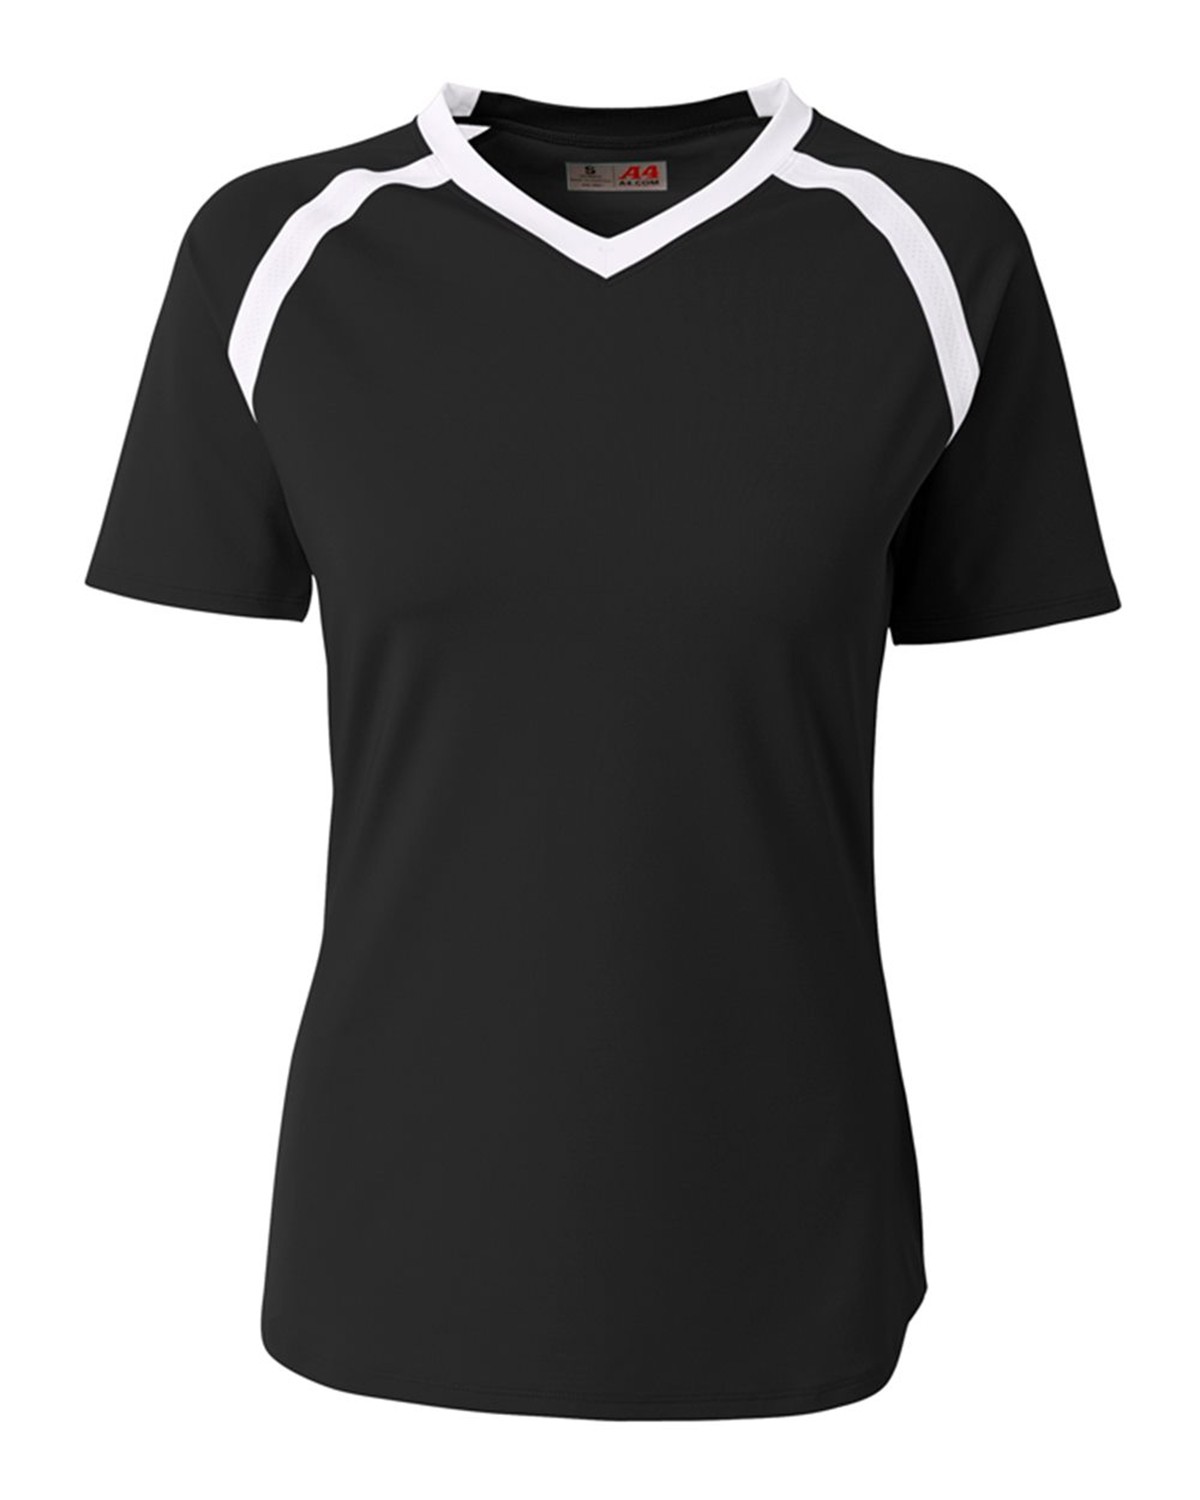 A4 NW3019 Women's Ace Short Sleeve Volleyball Jersey